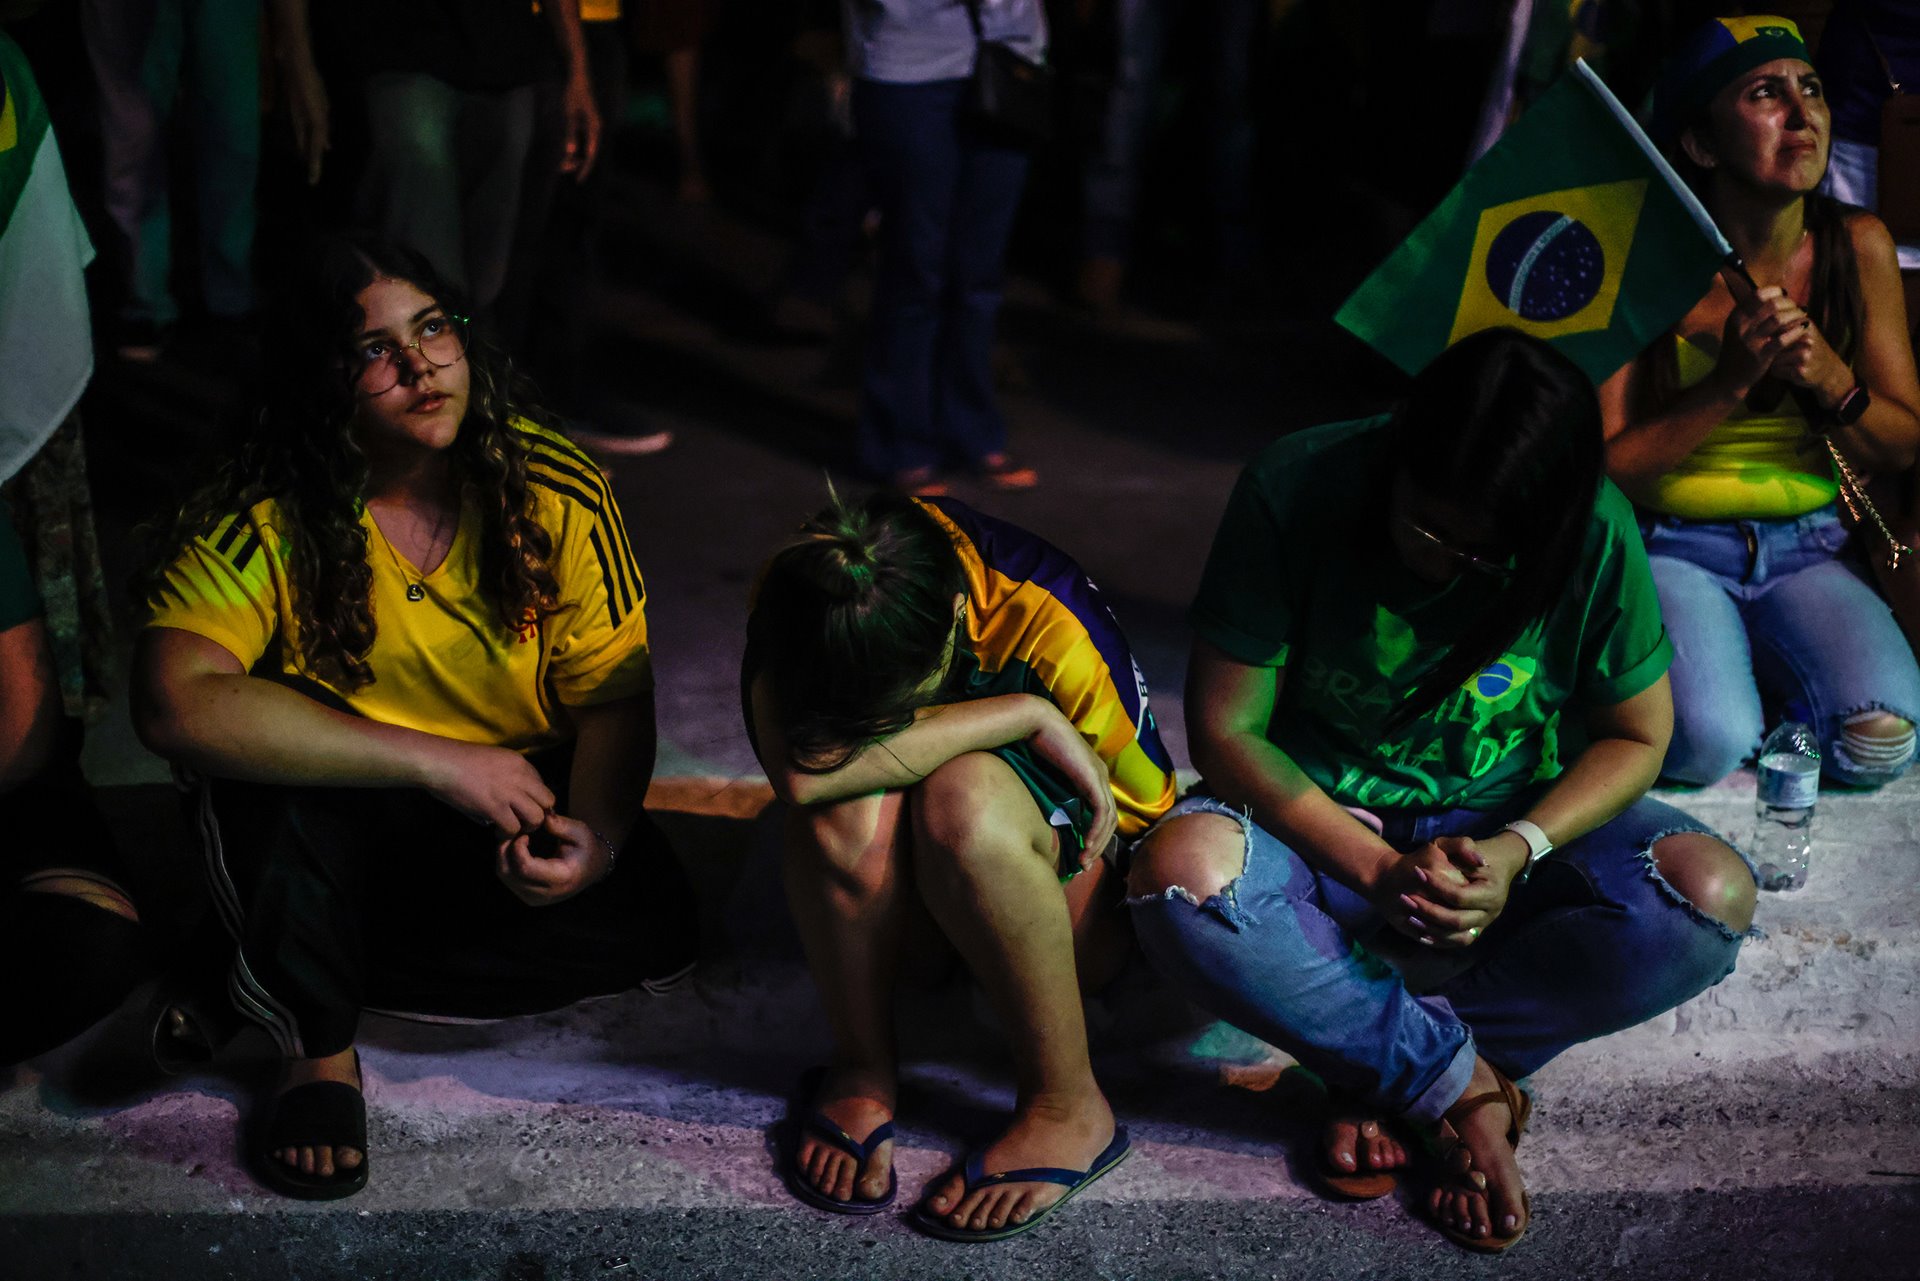 Bolsonaro supporters in disbelief after his defeat, in The Monumental Axis, Brasilia, Brazil. &nbsp;Jair Bolsonaro was defeated in a runoff by former president Luiz Inácio Lula da Silva by an extremely narrow margin. Lula received 50.90% of the votes and Bolsonaro, 49.10%, the smallest difference ever recorded in Brazilian history since 1989, when the country returned to hold free elections for the presidency of the Republic after redemocratization.&nbsp;